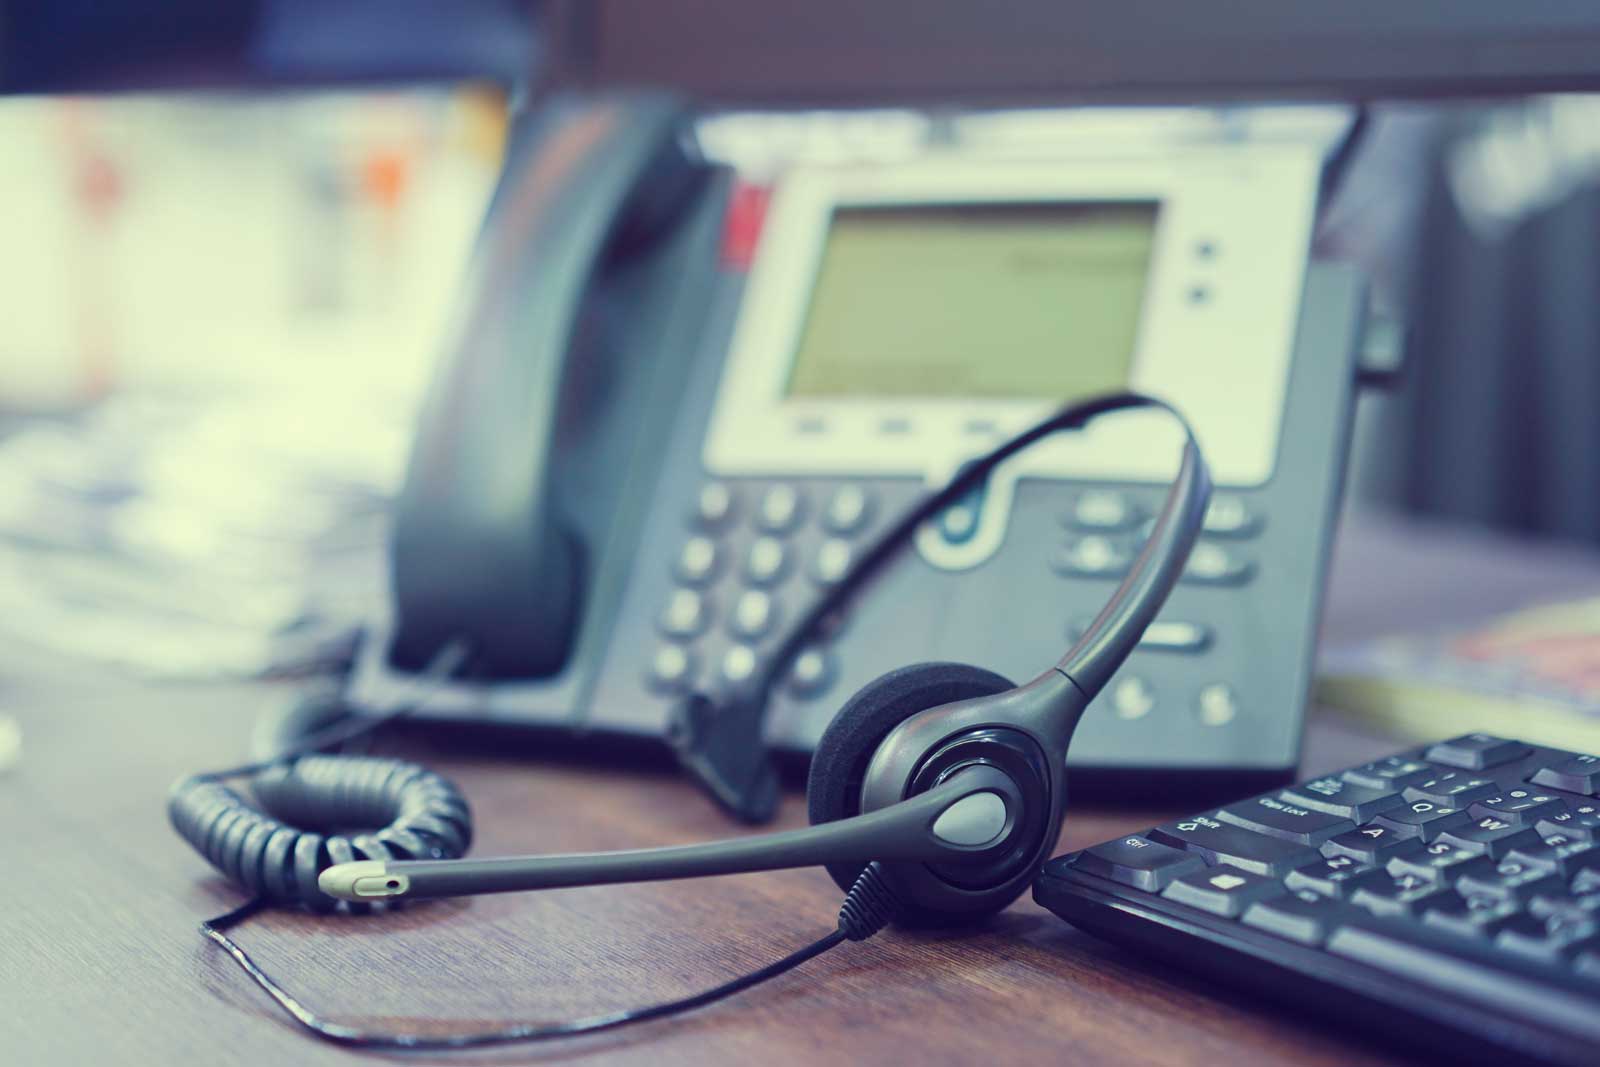 Business telephone systems prices